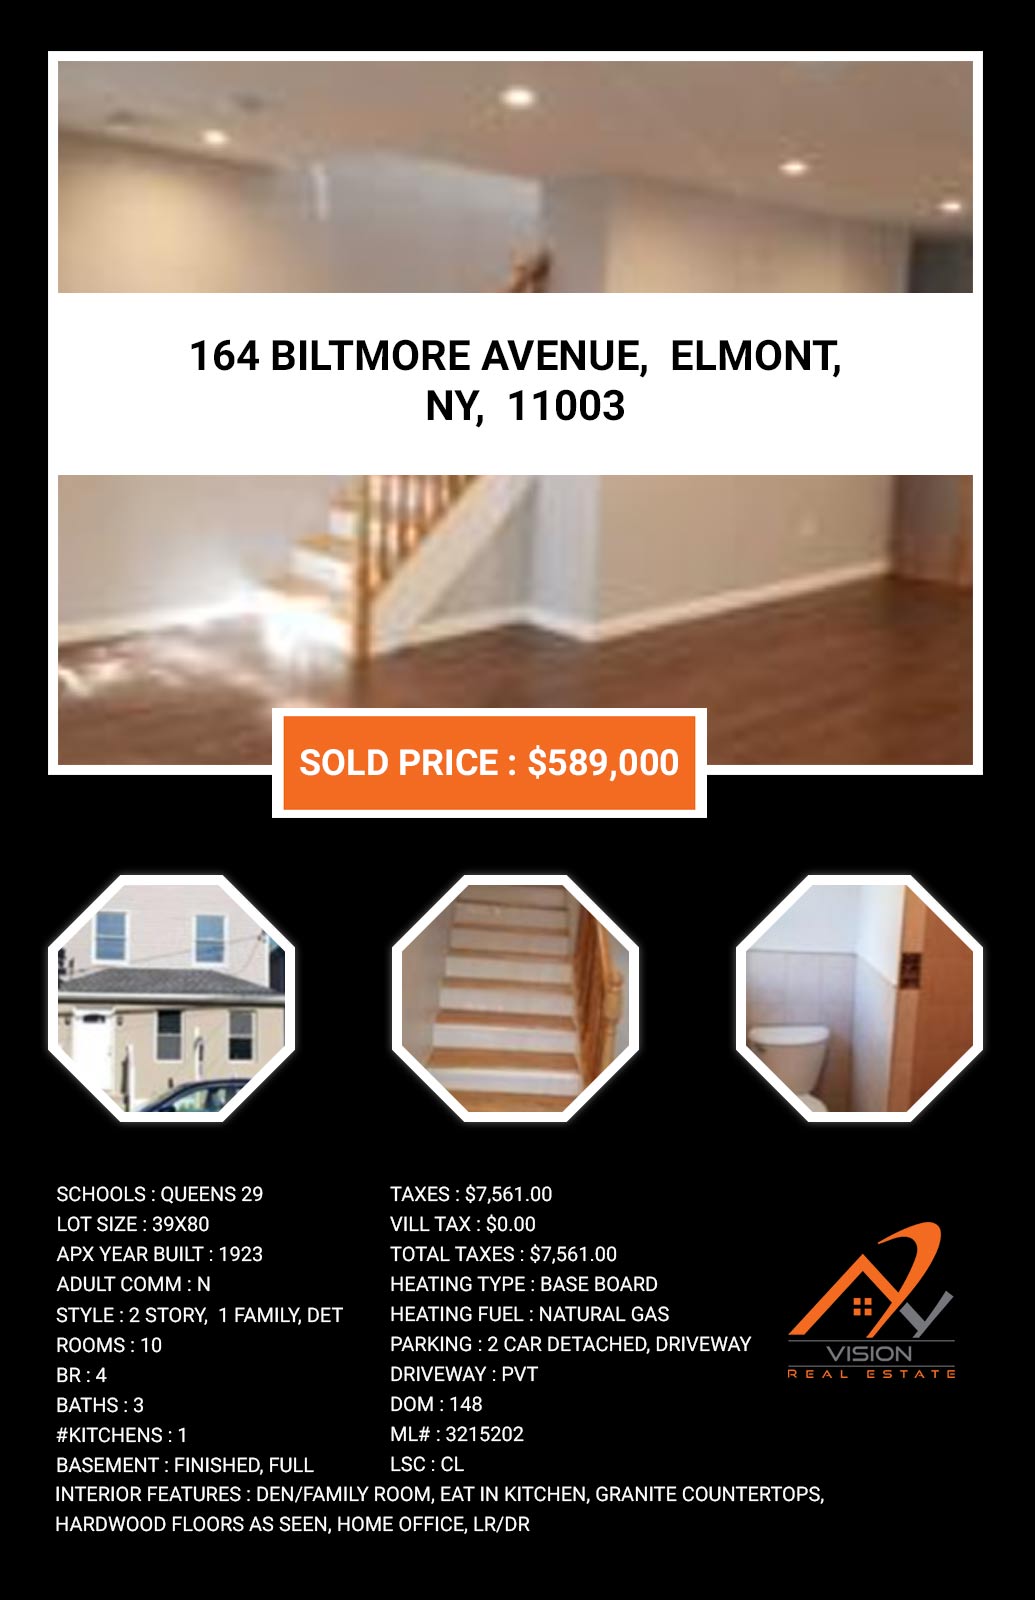 Home for Sale Biltmore Avenue, Elmont, NY